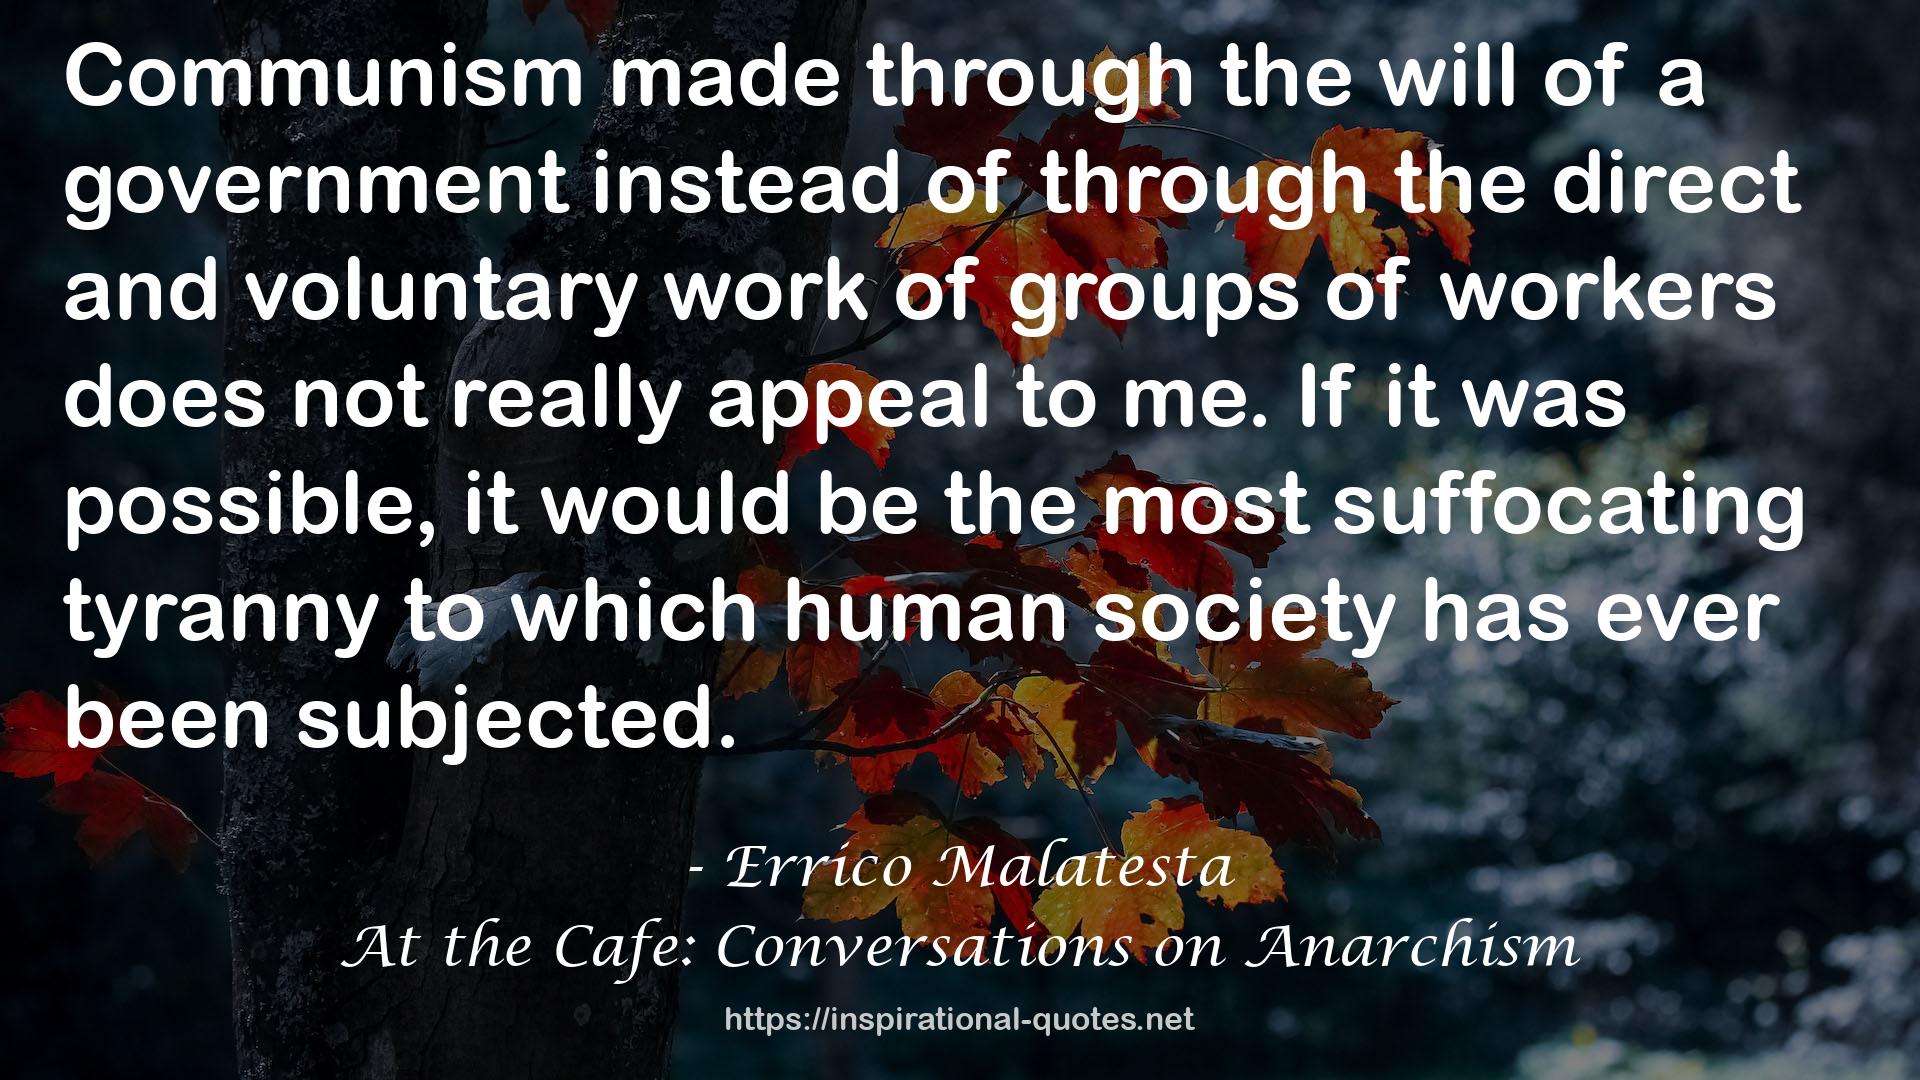 At the Cafe: Conversations on Anarchism QUOTES